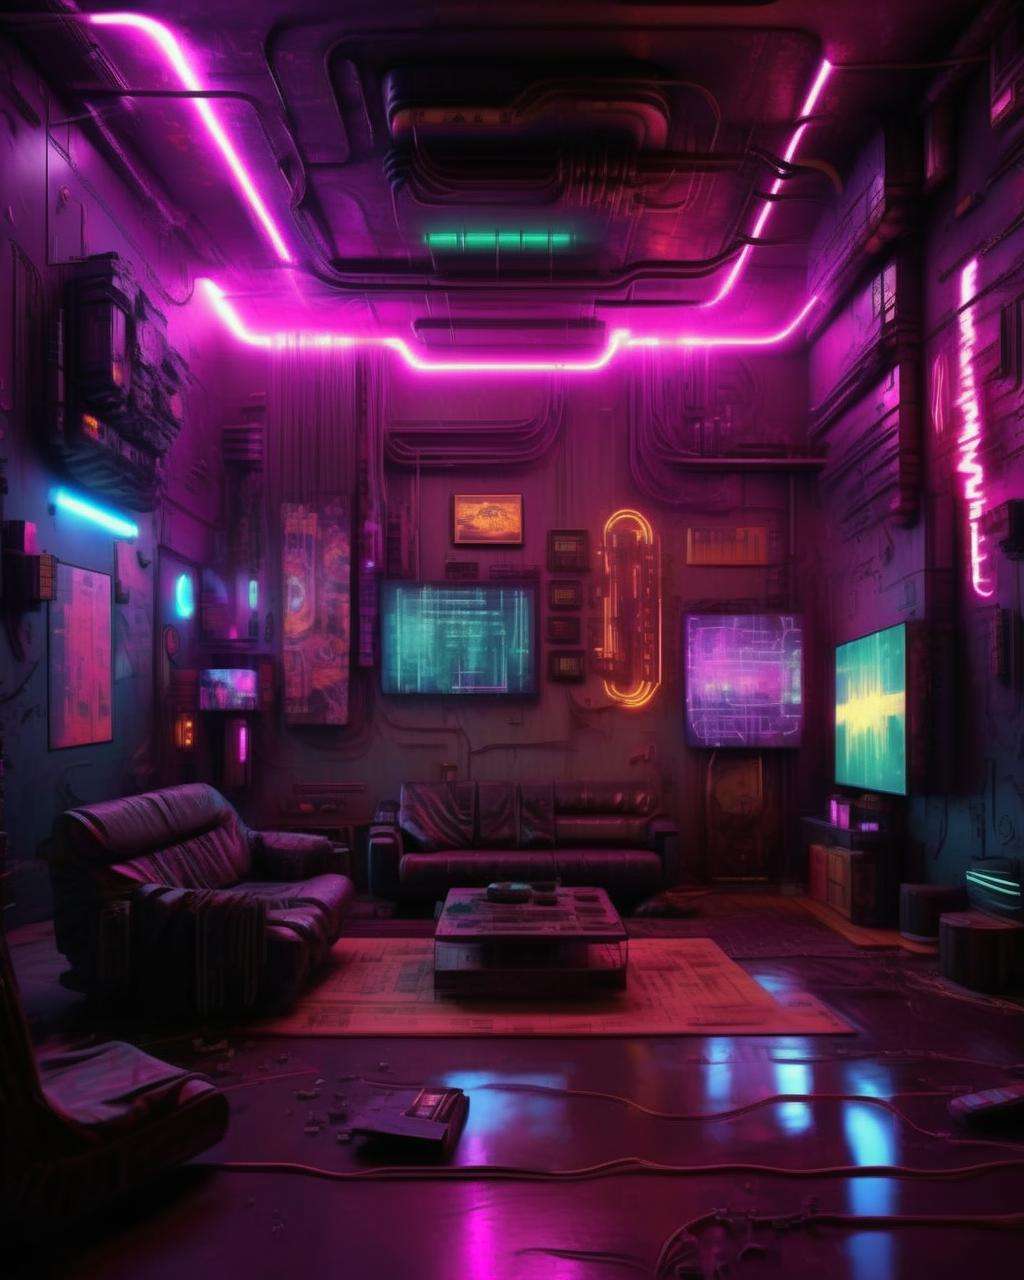 (a cyberpunk interior design ), Magnetic stormfront, an electrifying tempest of charged particles crackling across a dark sky. , cyberpunk style environment <lora:Cyber_Background_sdxl:1.0>